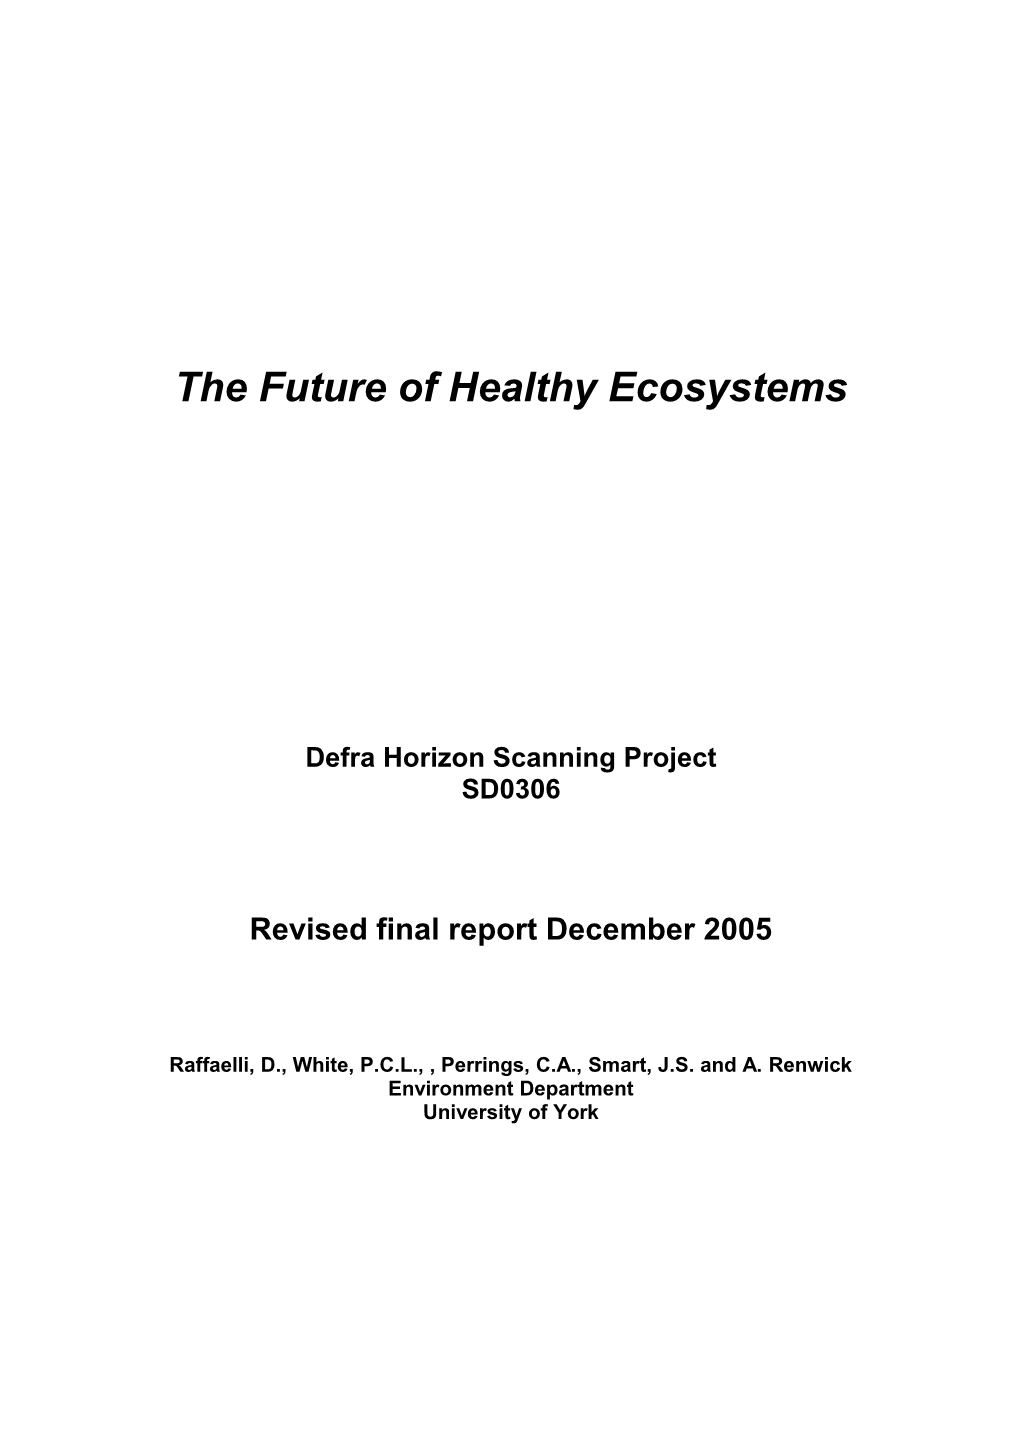 The Future Of Healthy Ecosystems